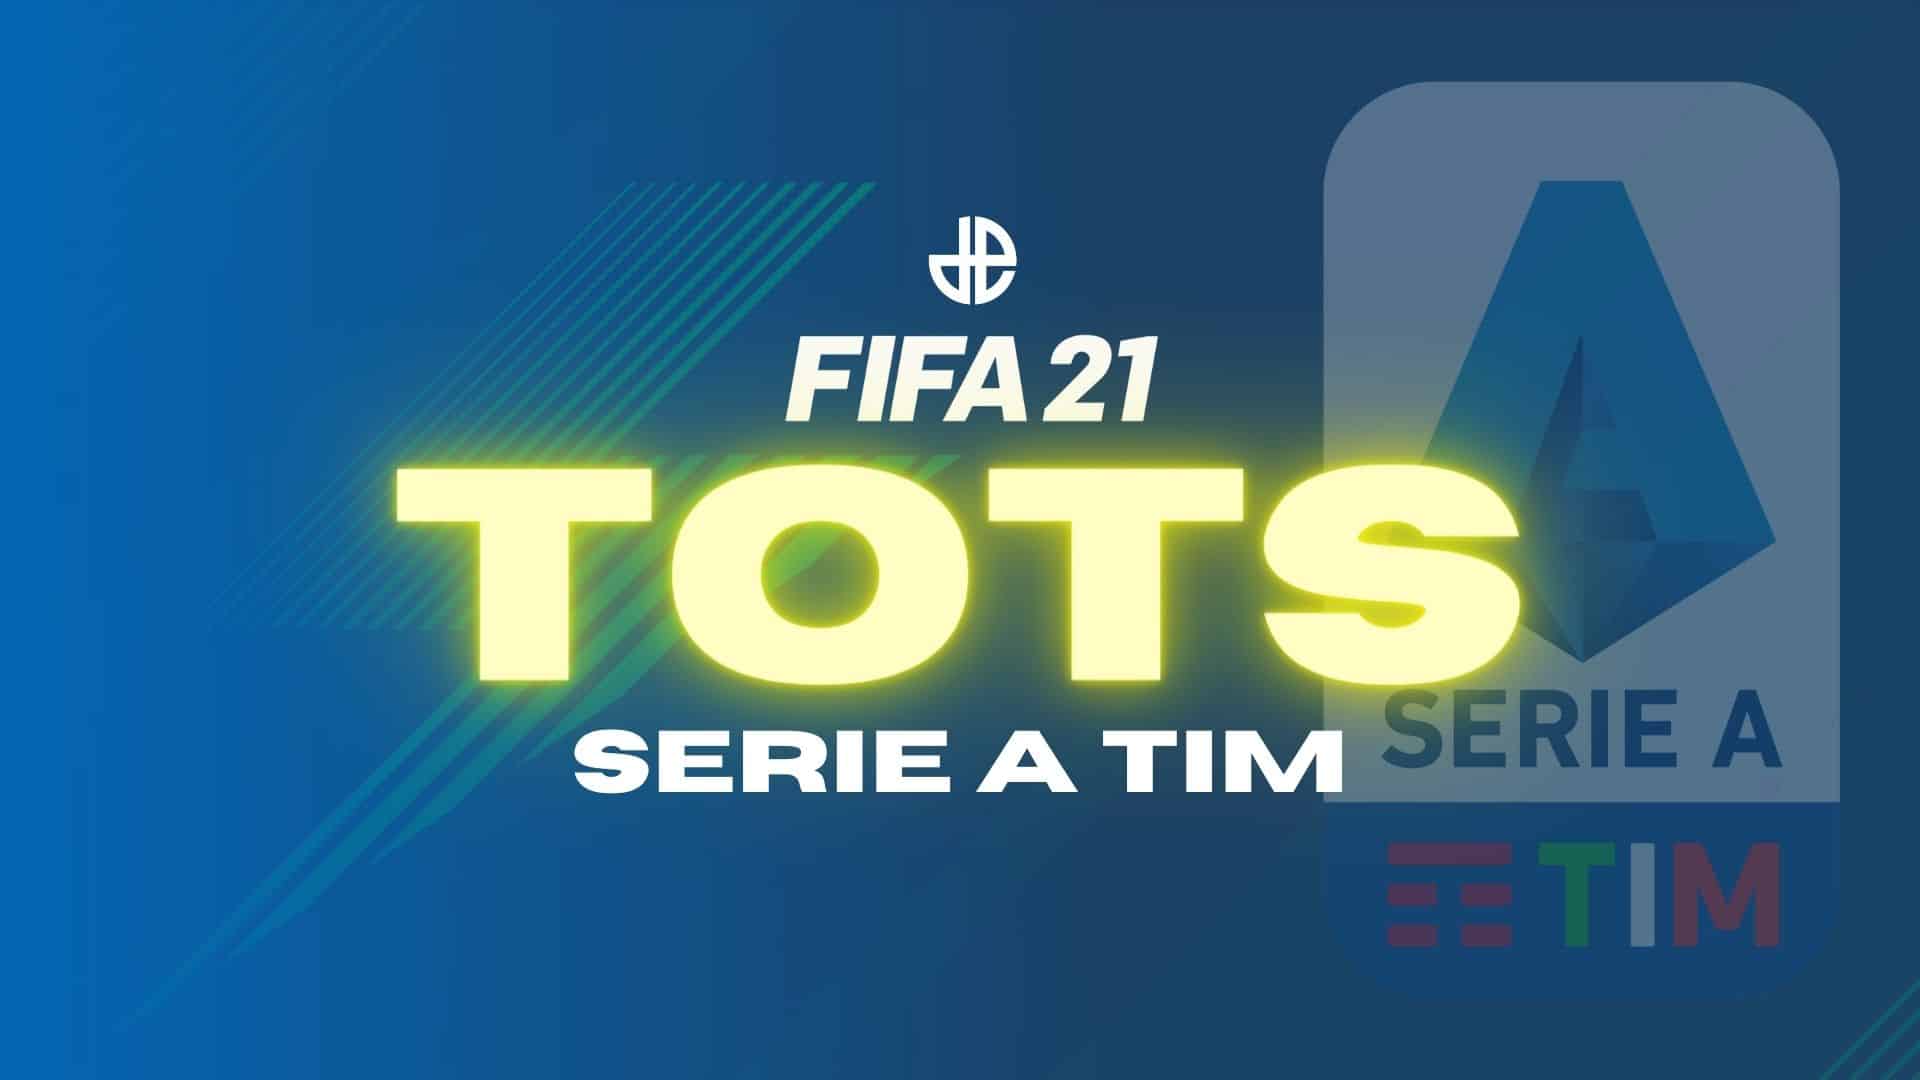 Serie A TOTS Team of the Season revealed leaks.